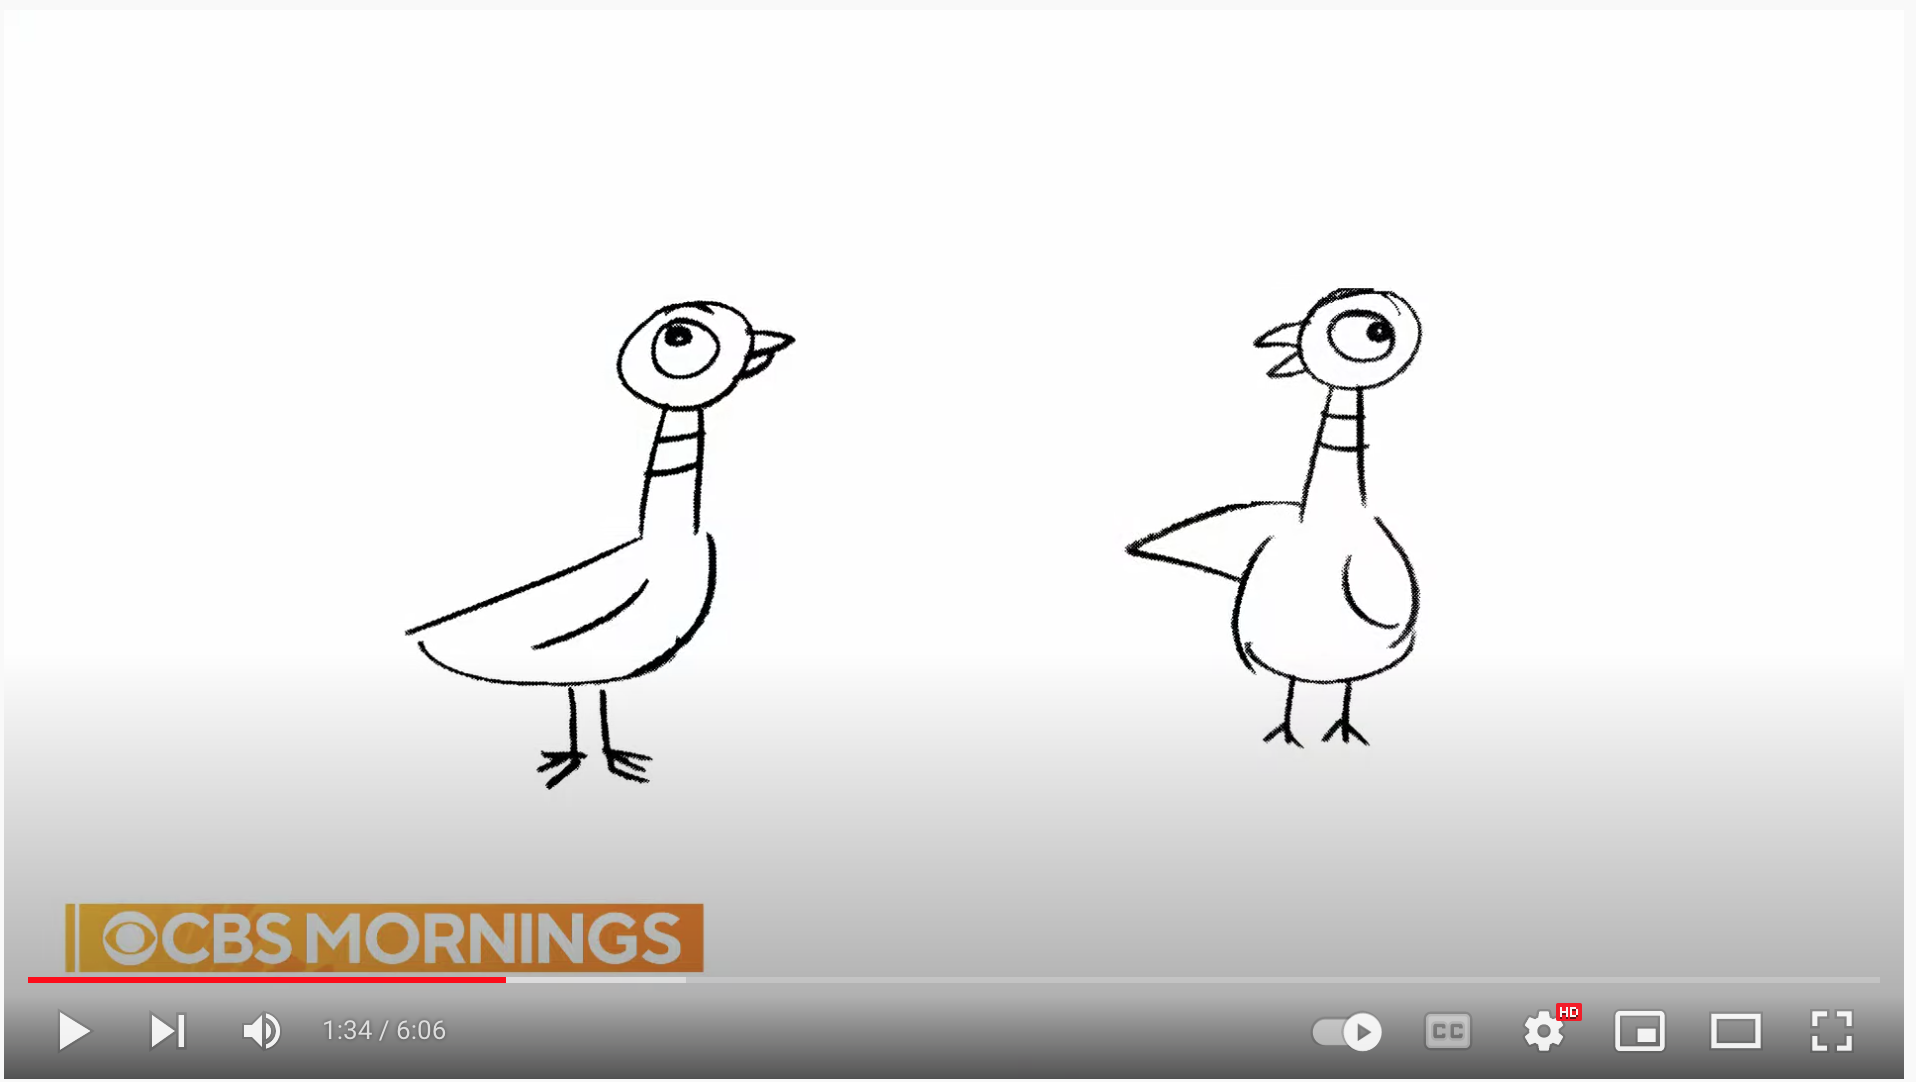 Books on Film: Mo Willems on CBS Mornings